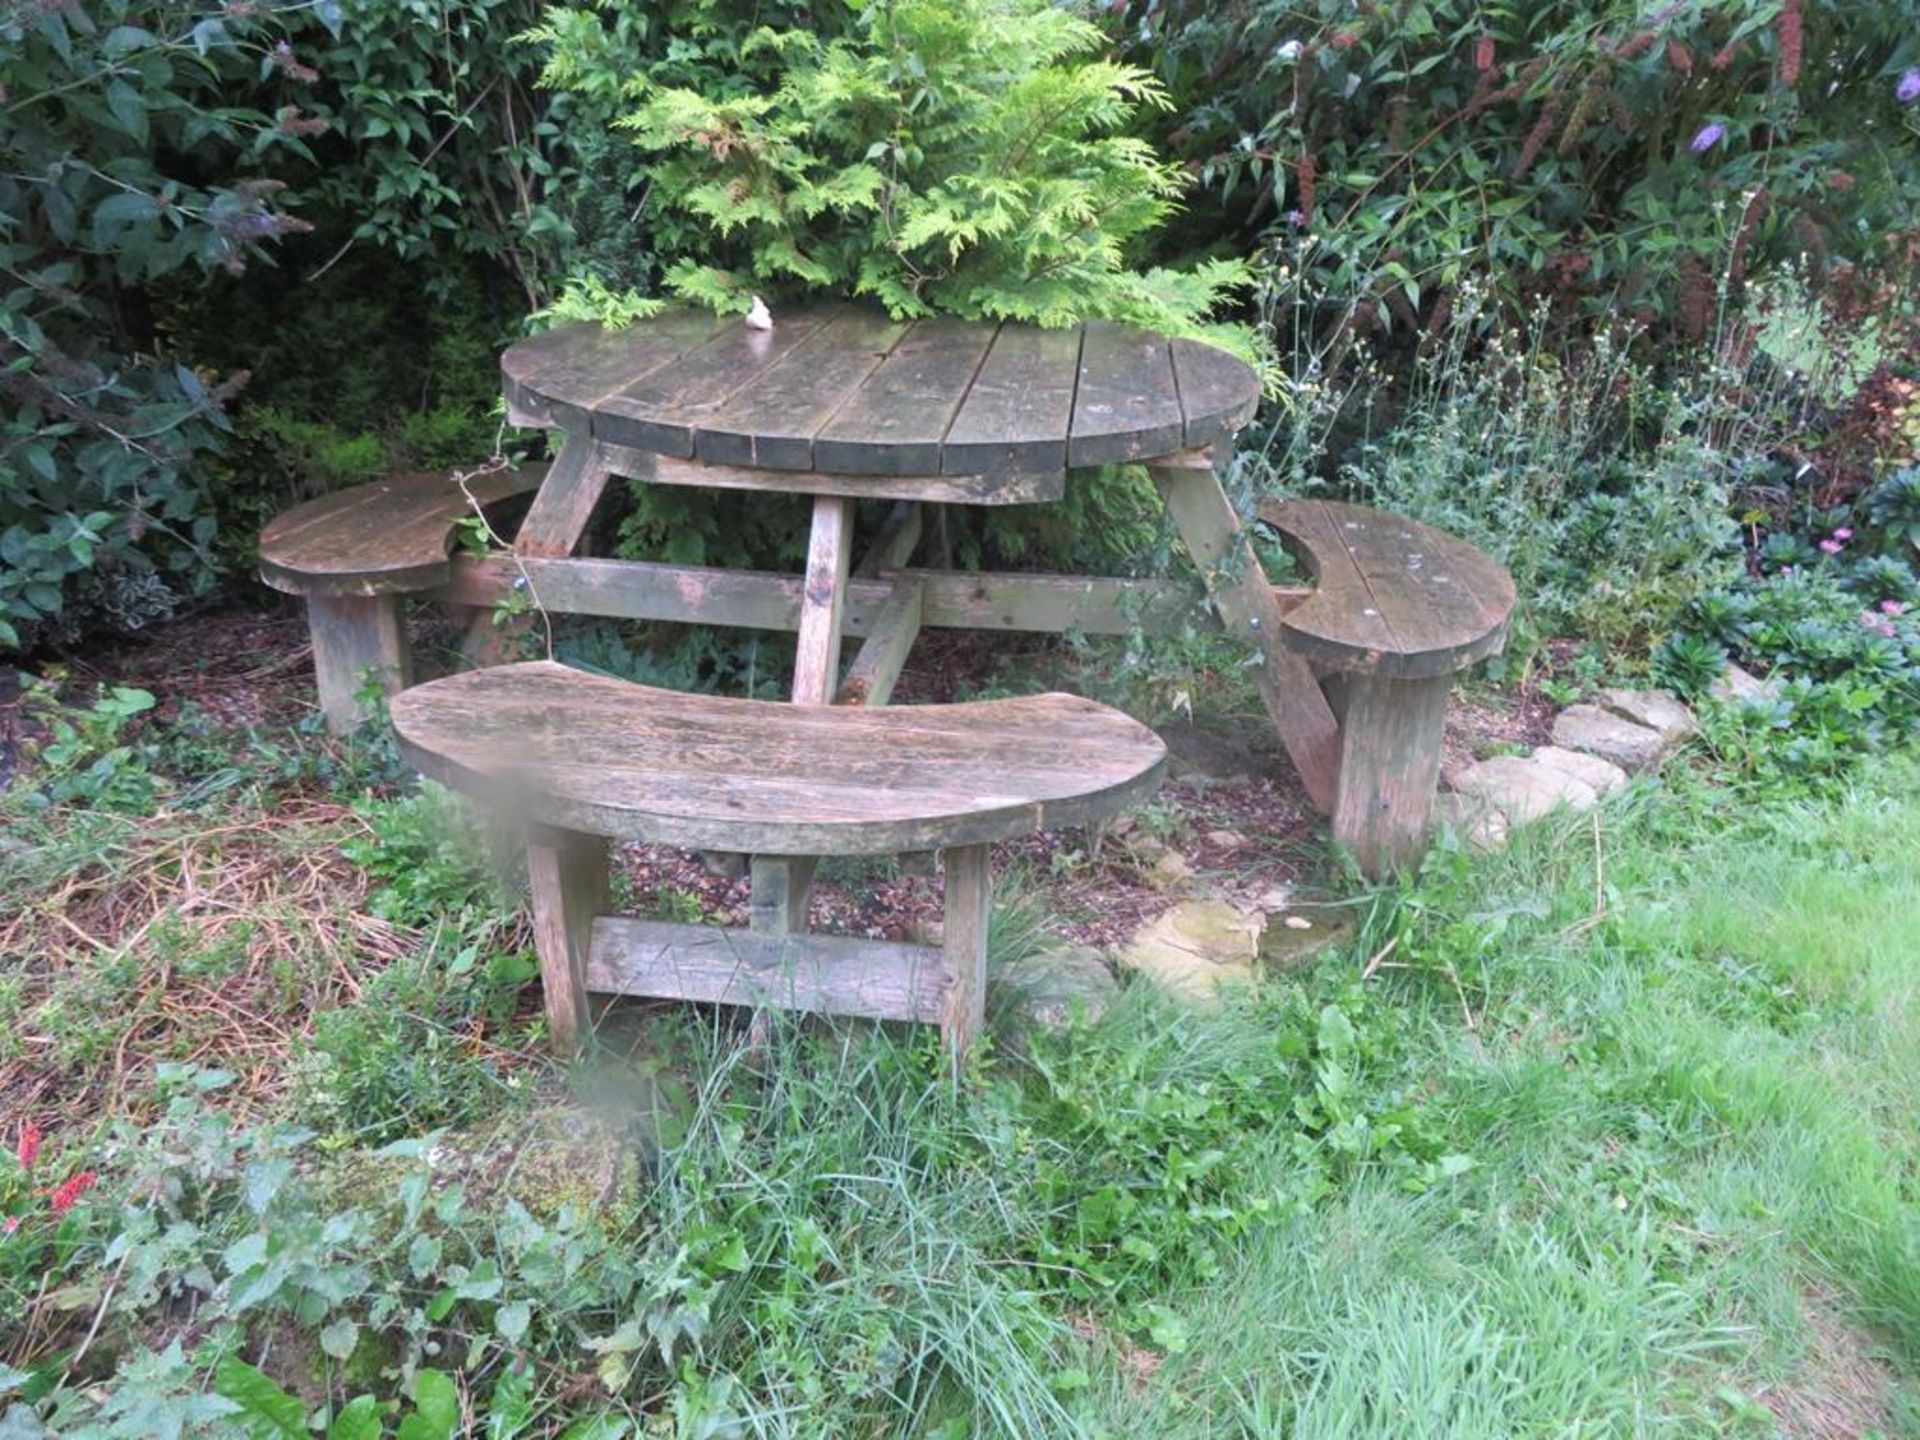 2 x round wooden garden bench tables - Image 2 of 2